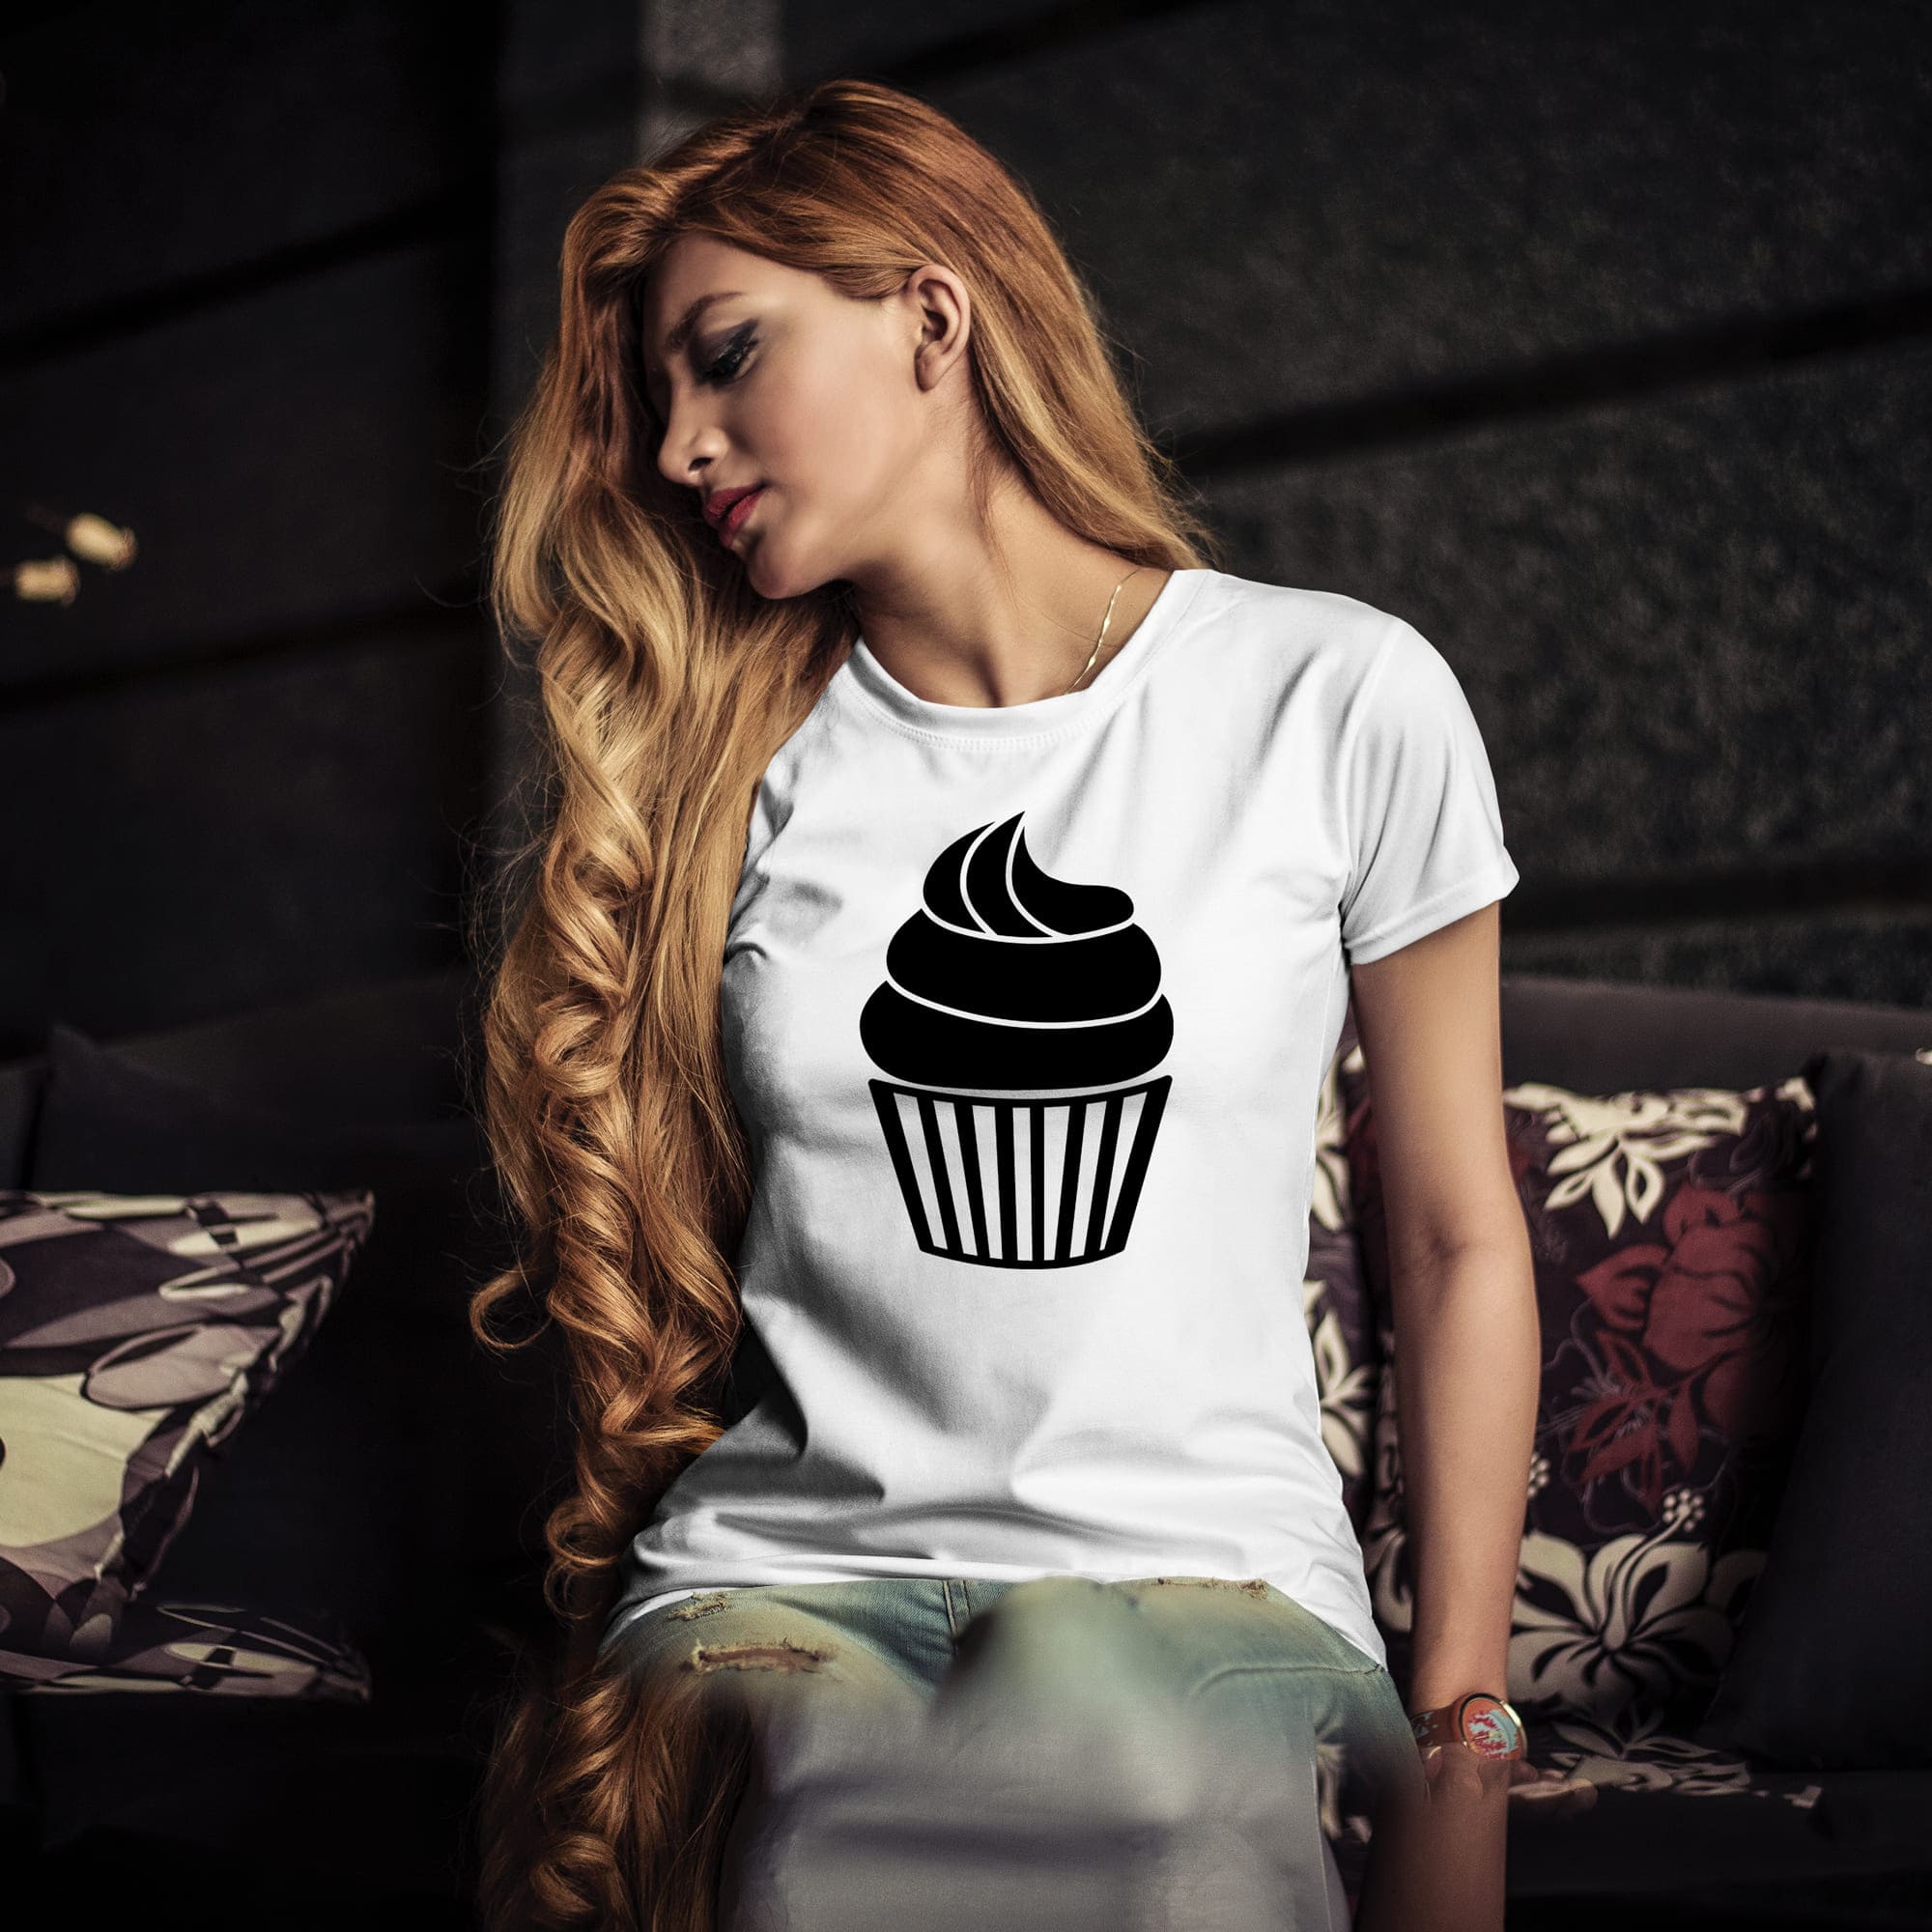 Cupcakes with chocolate cream painted on a girl's white t-shirt.